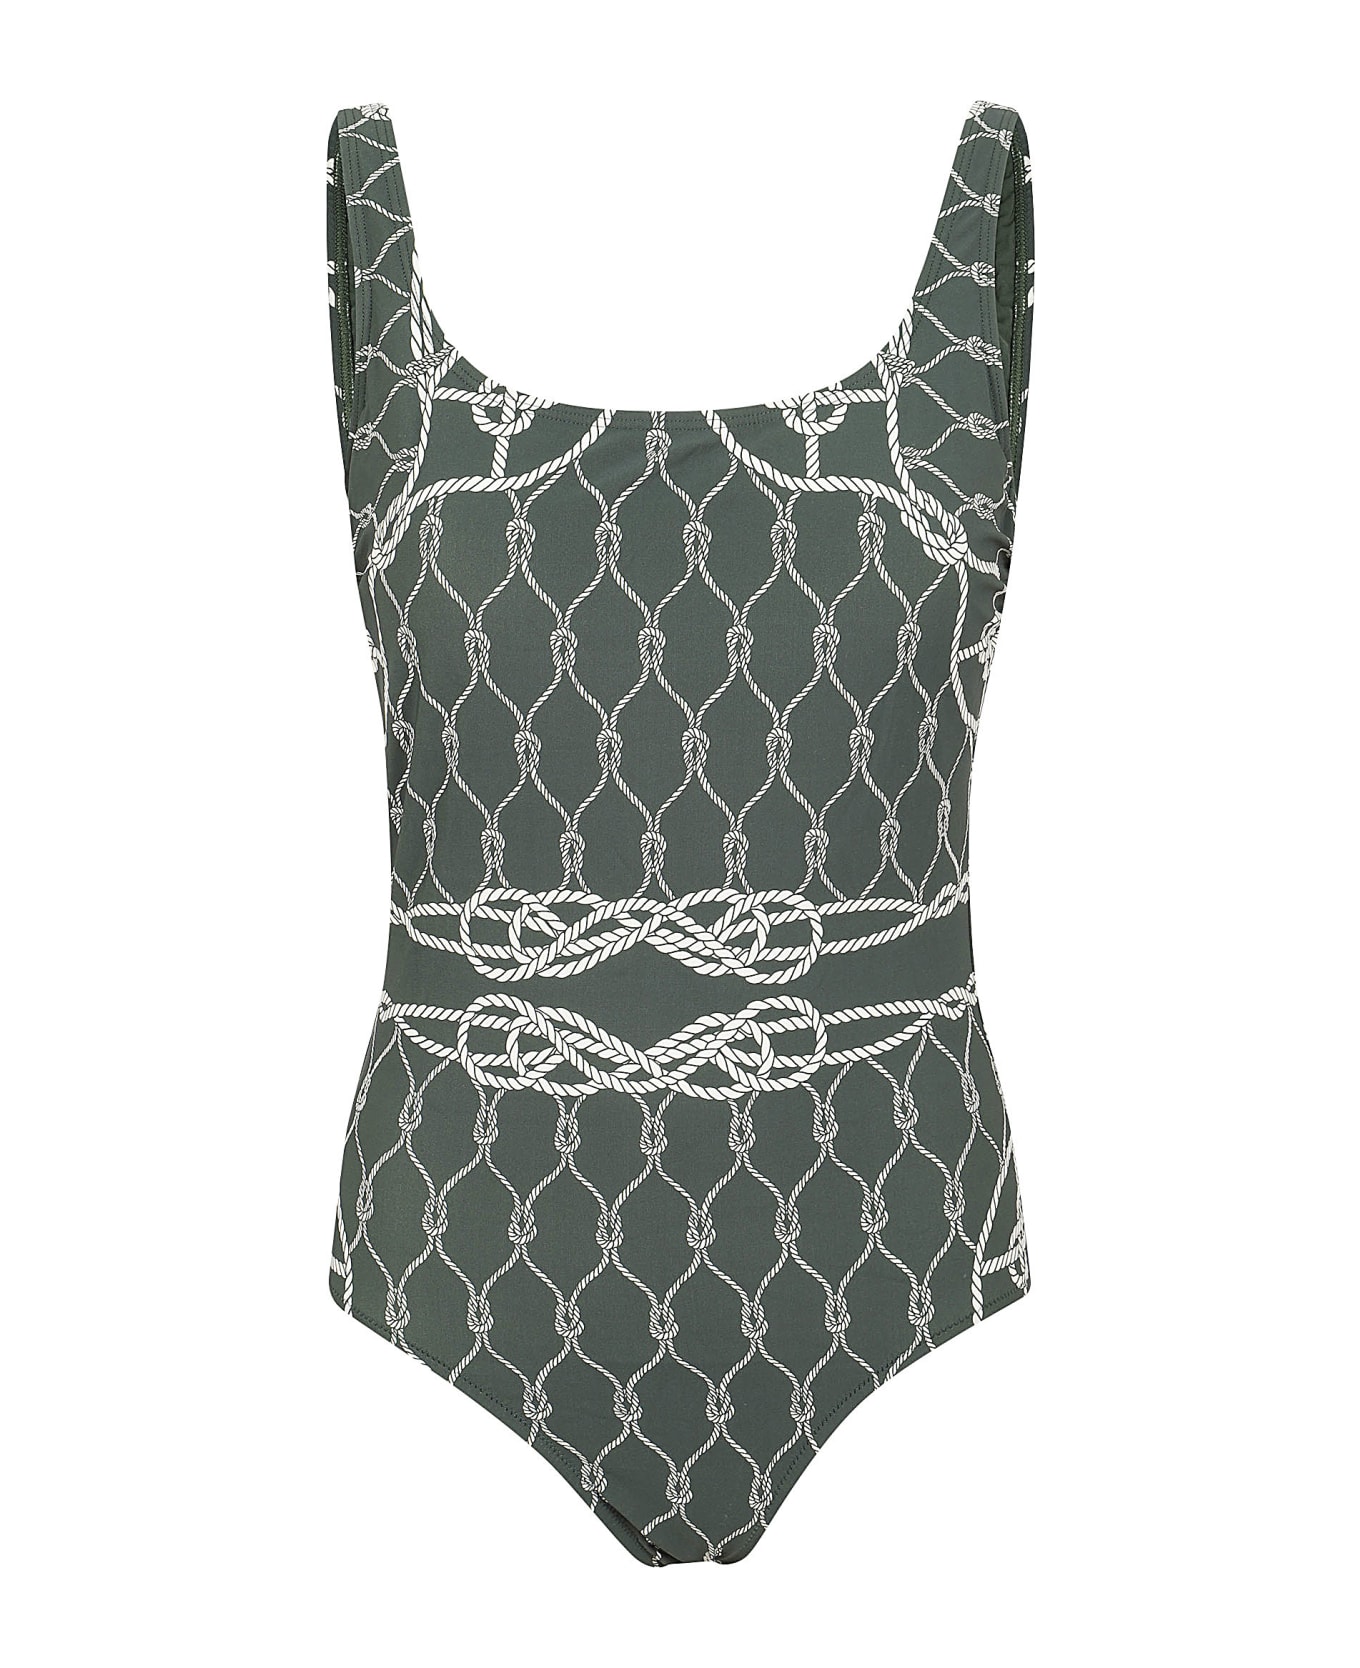 Tory Burch Printed Tank Suit - Ivory Knot